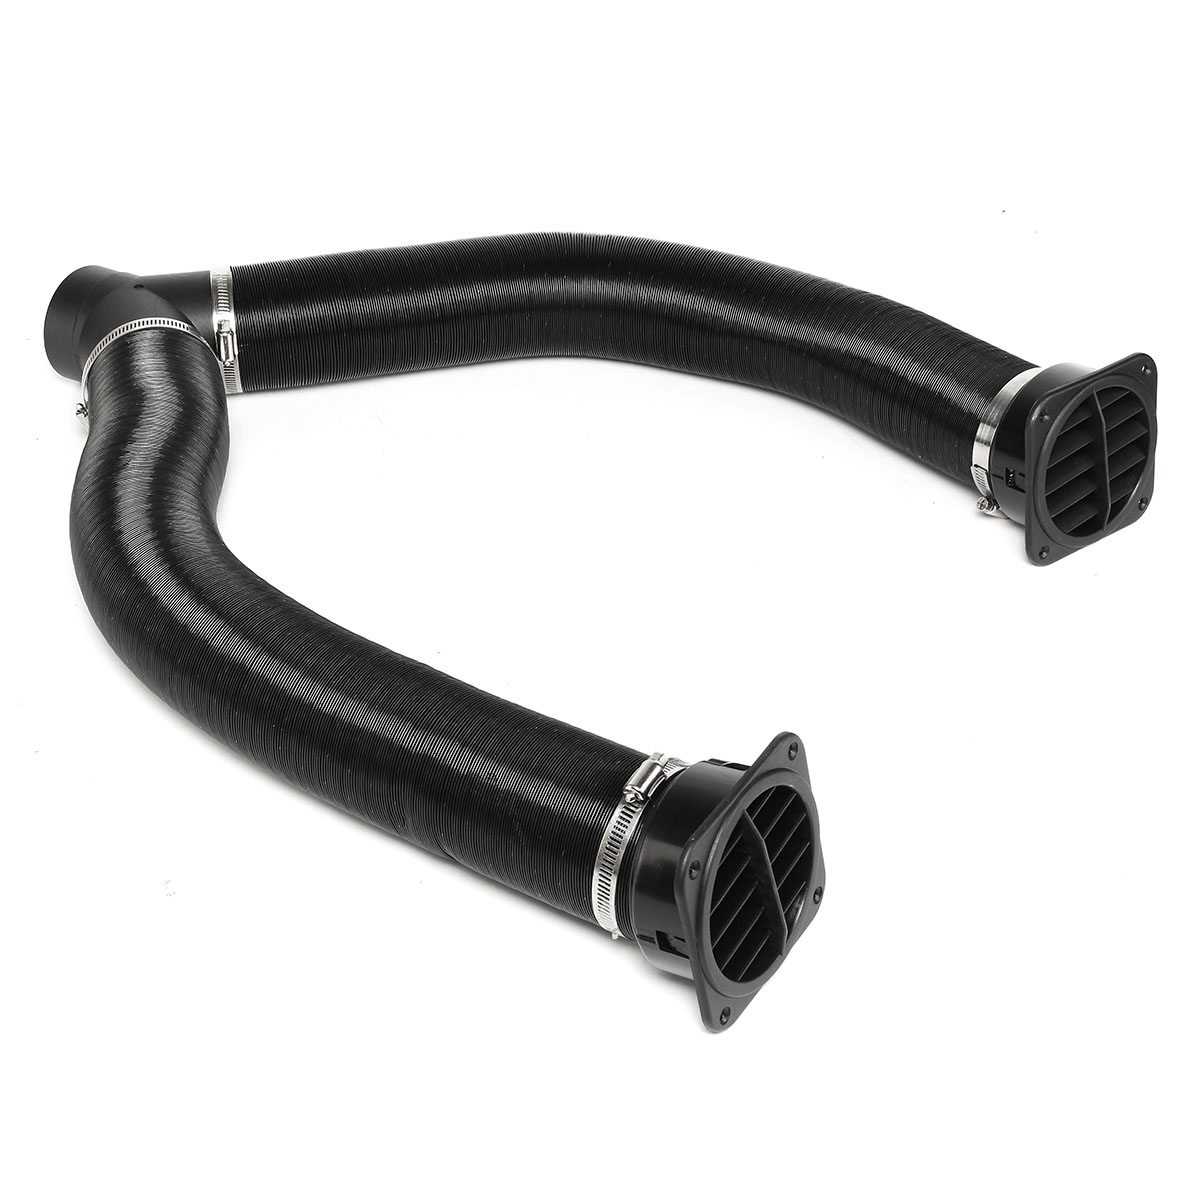 75mm-Heater-Pipe-Duct--Warm-Air-Outlet-For-Diesel-Heater-Webasto-Eberspacher-1396630-7